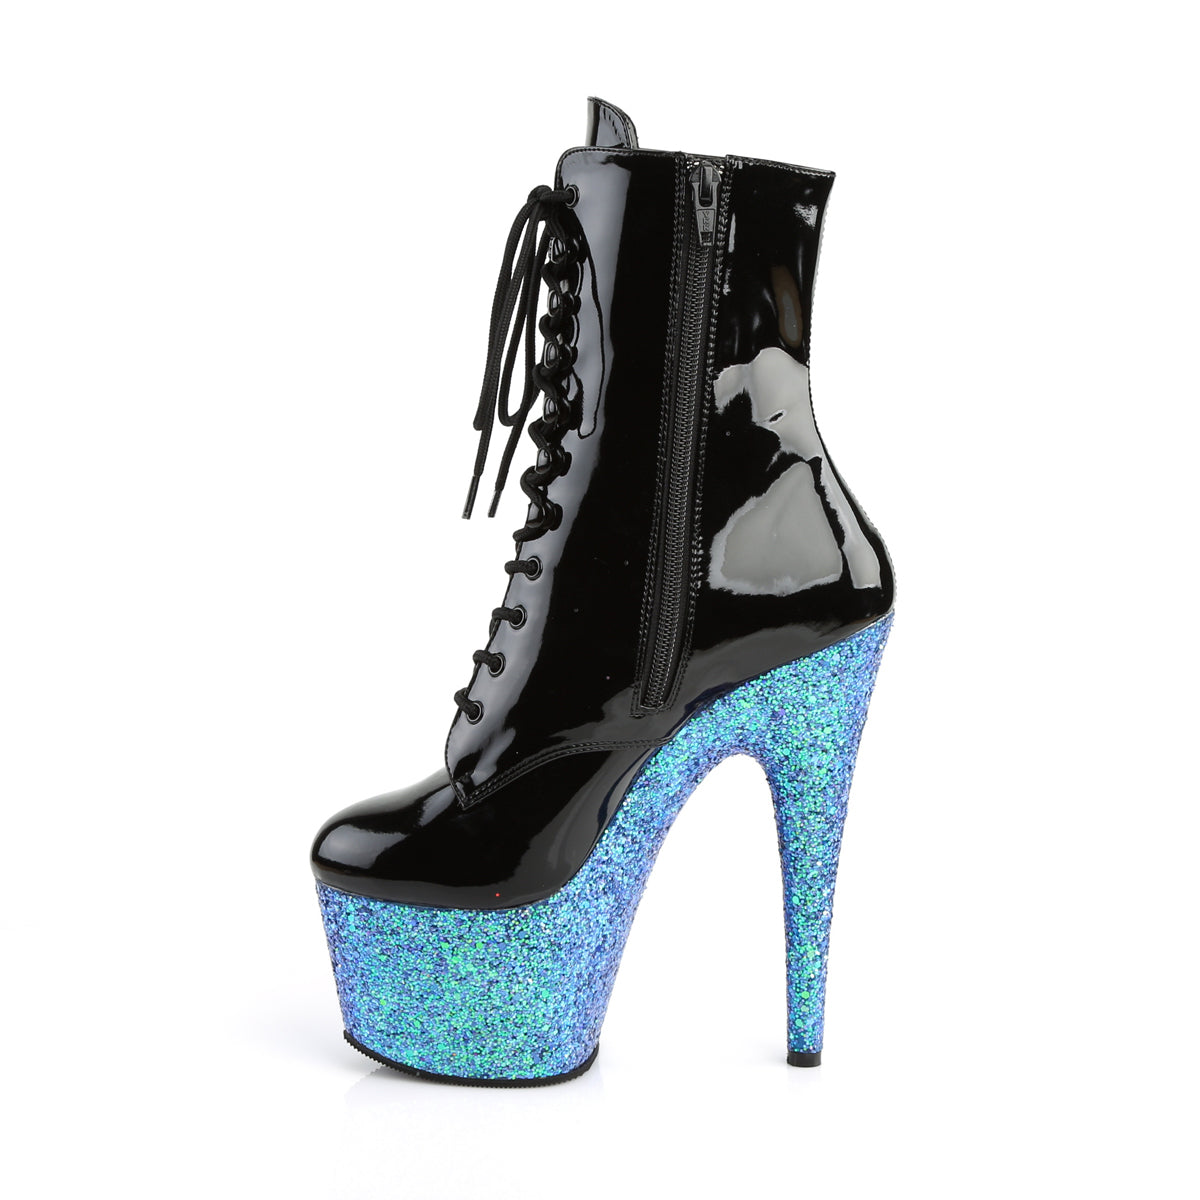 ADORE-1020LG 7" Heel Black Blue Exotic Dancer Ankle Boots-Pleaser- Sexy Shoes Pole Dance Heels